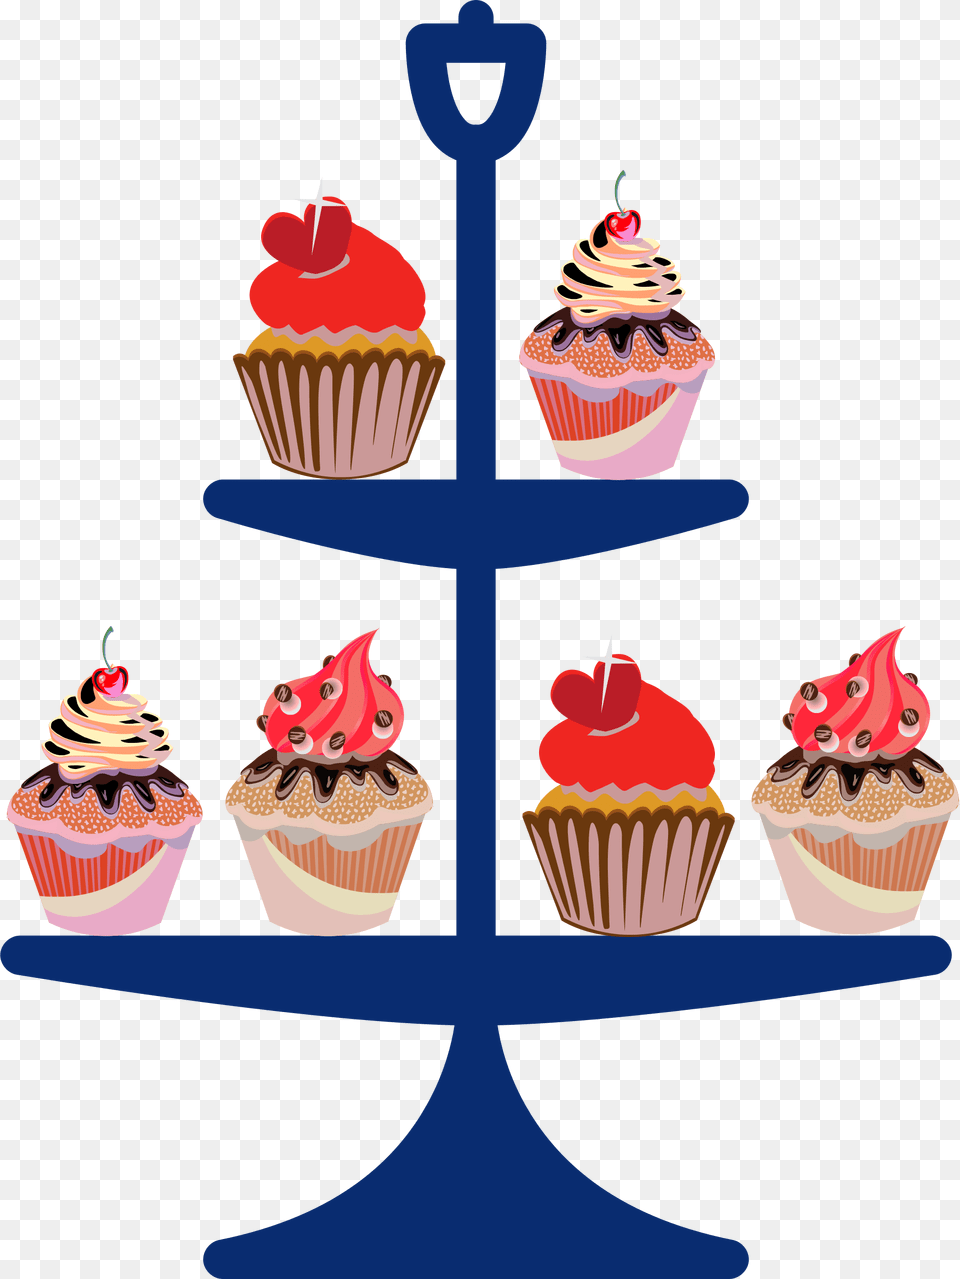 Cakes On A Stand Clip Arts Cupcake Bakery Clip Art, Cake, Cream, Dessert, Food Free Transparent Png